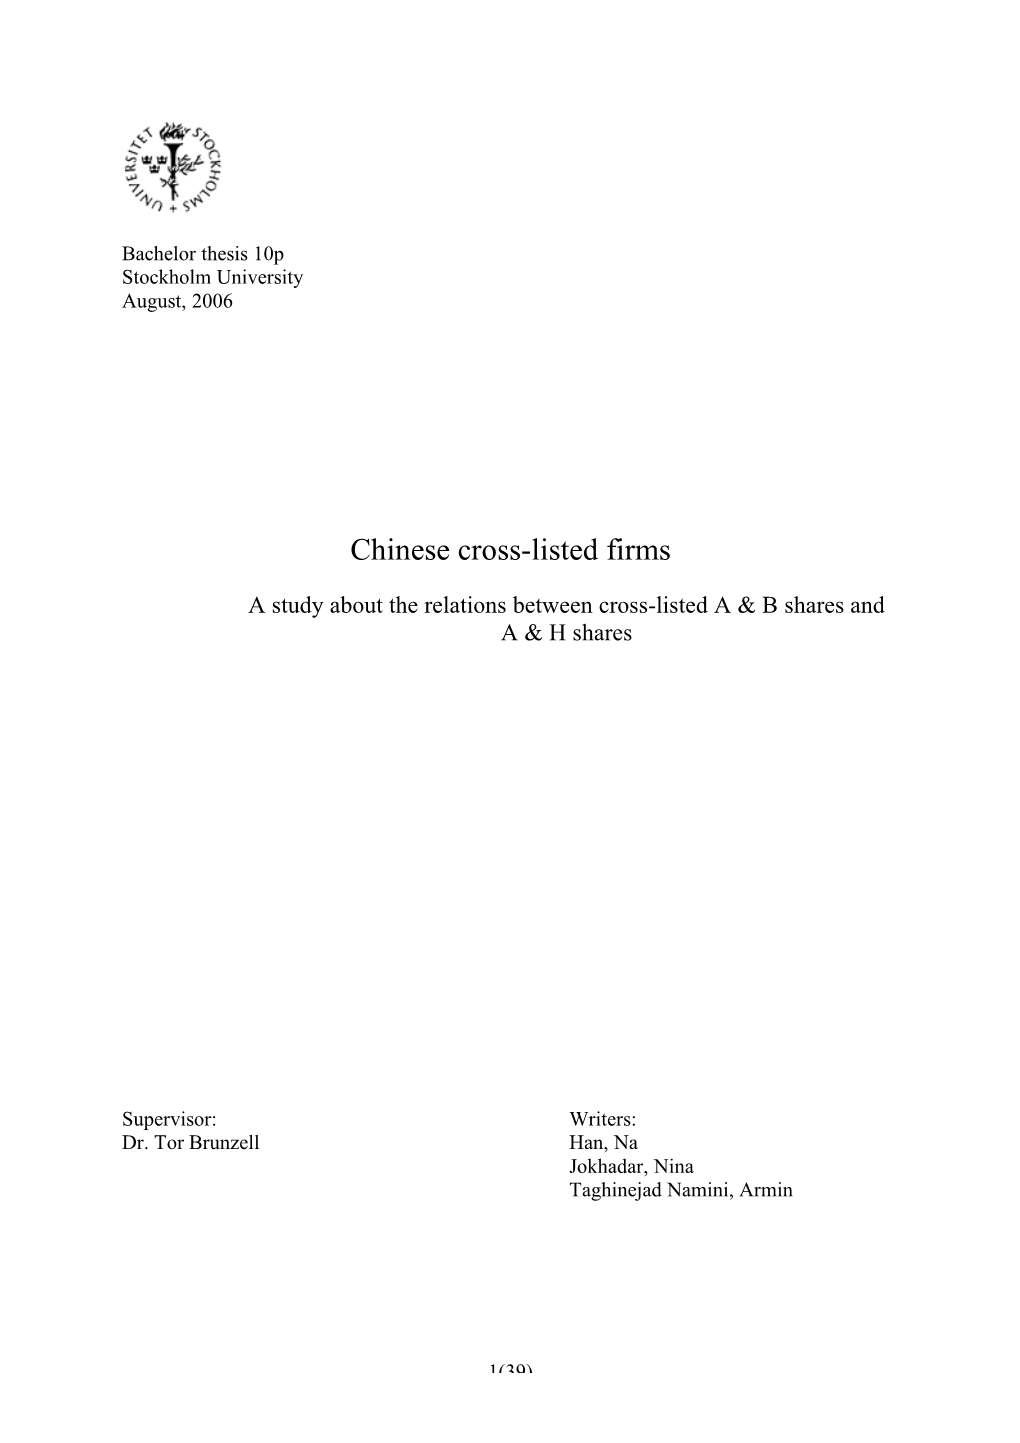 Chinese Cross-Listed Firms